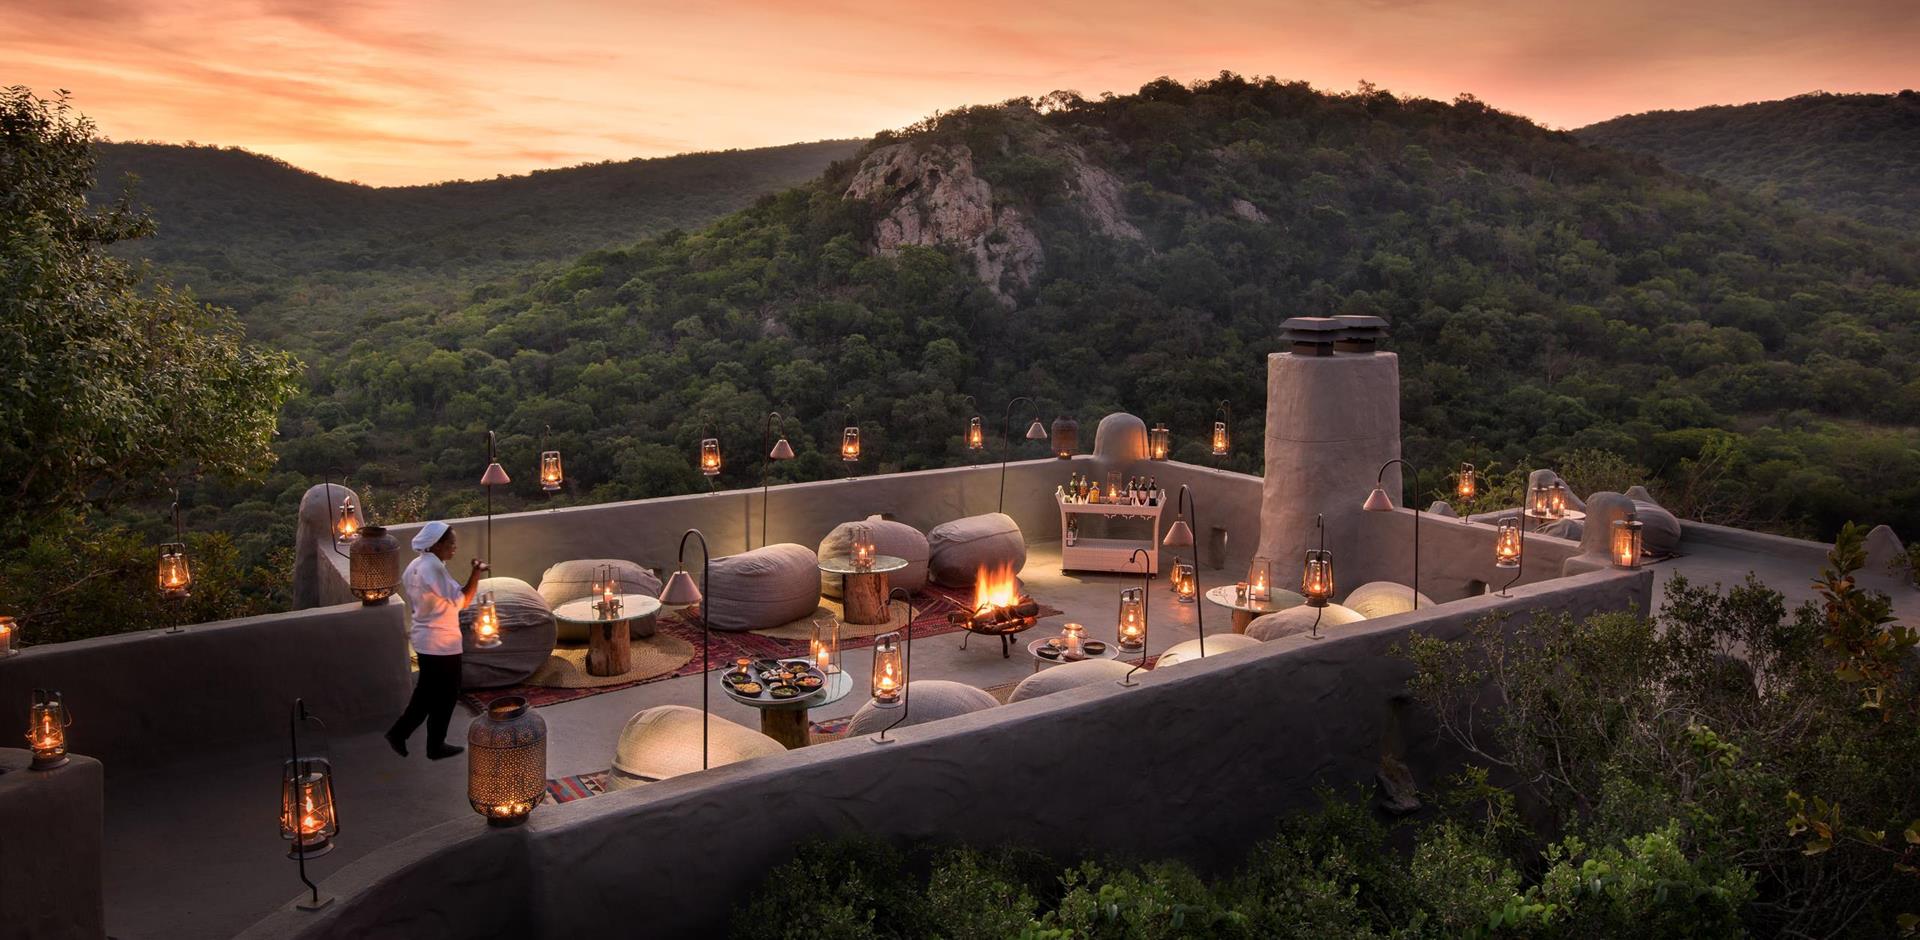 Rooftop lounge, andBeyond Phinda Rock Lodge, South Africa, A&K